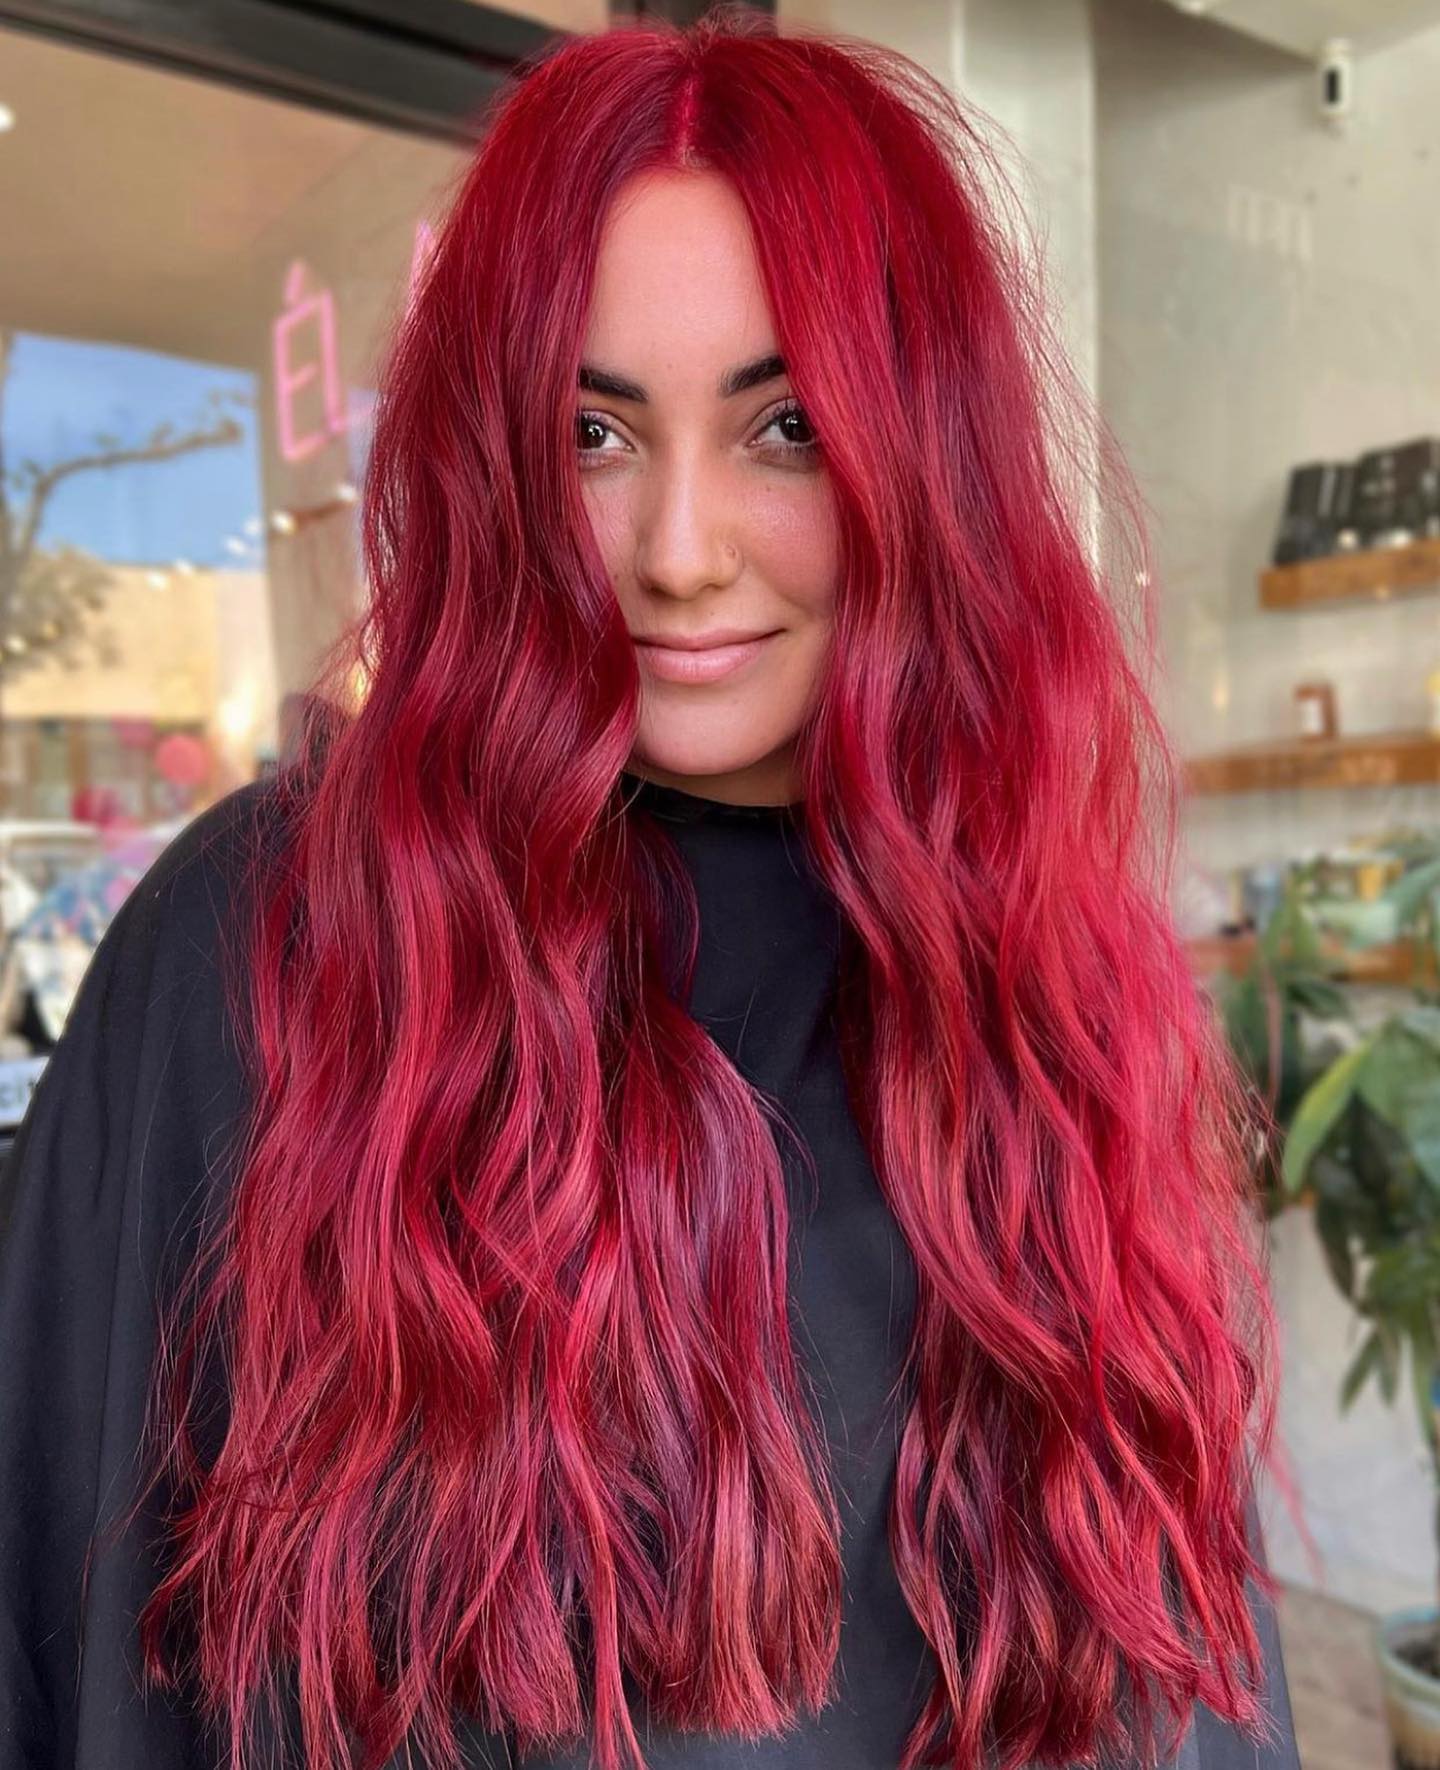 15 Warm Red Hair Colors That Flatter Every Skin Tone